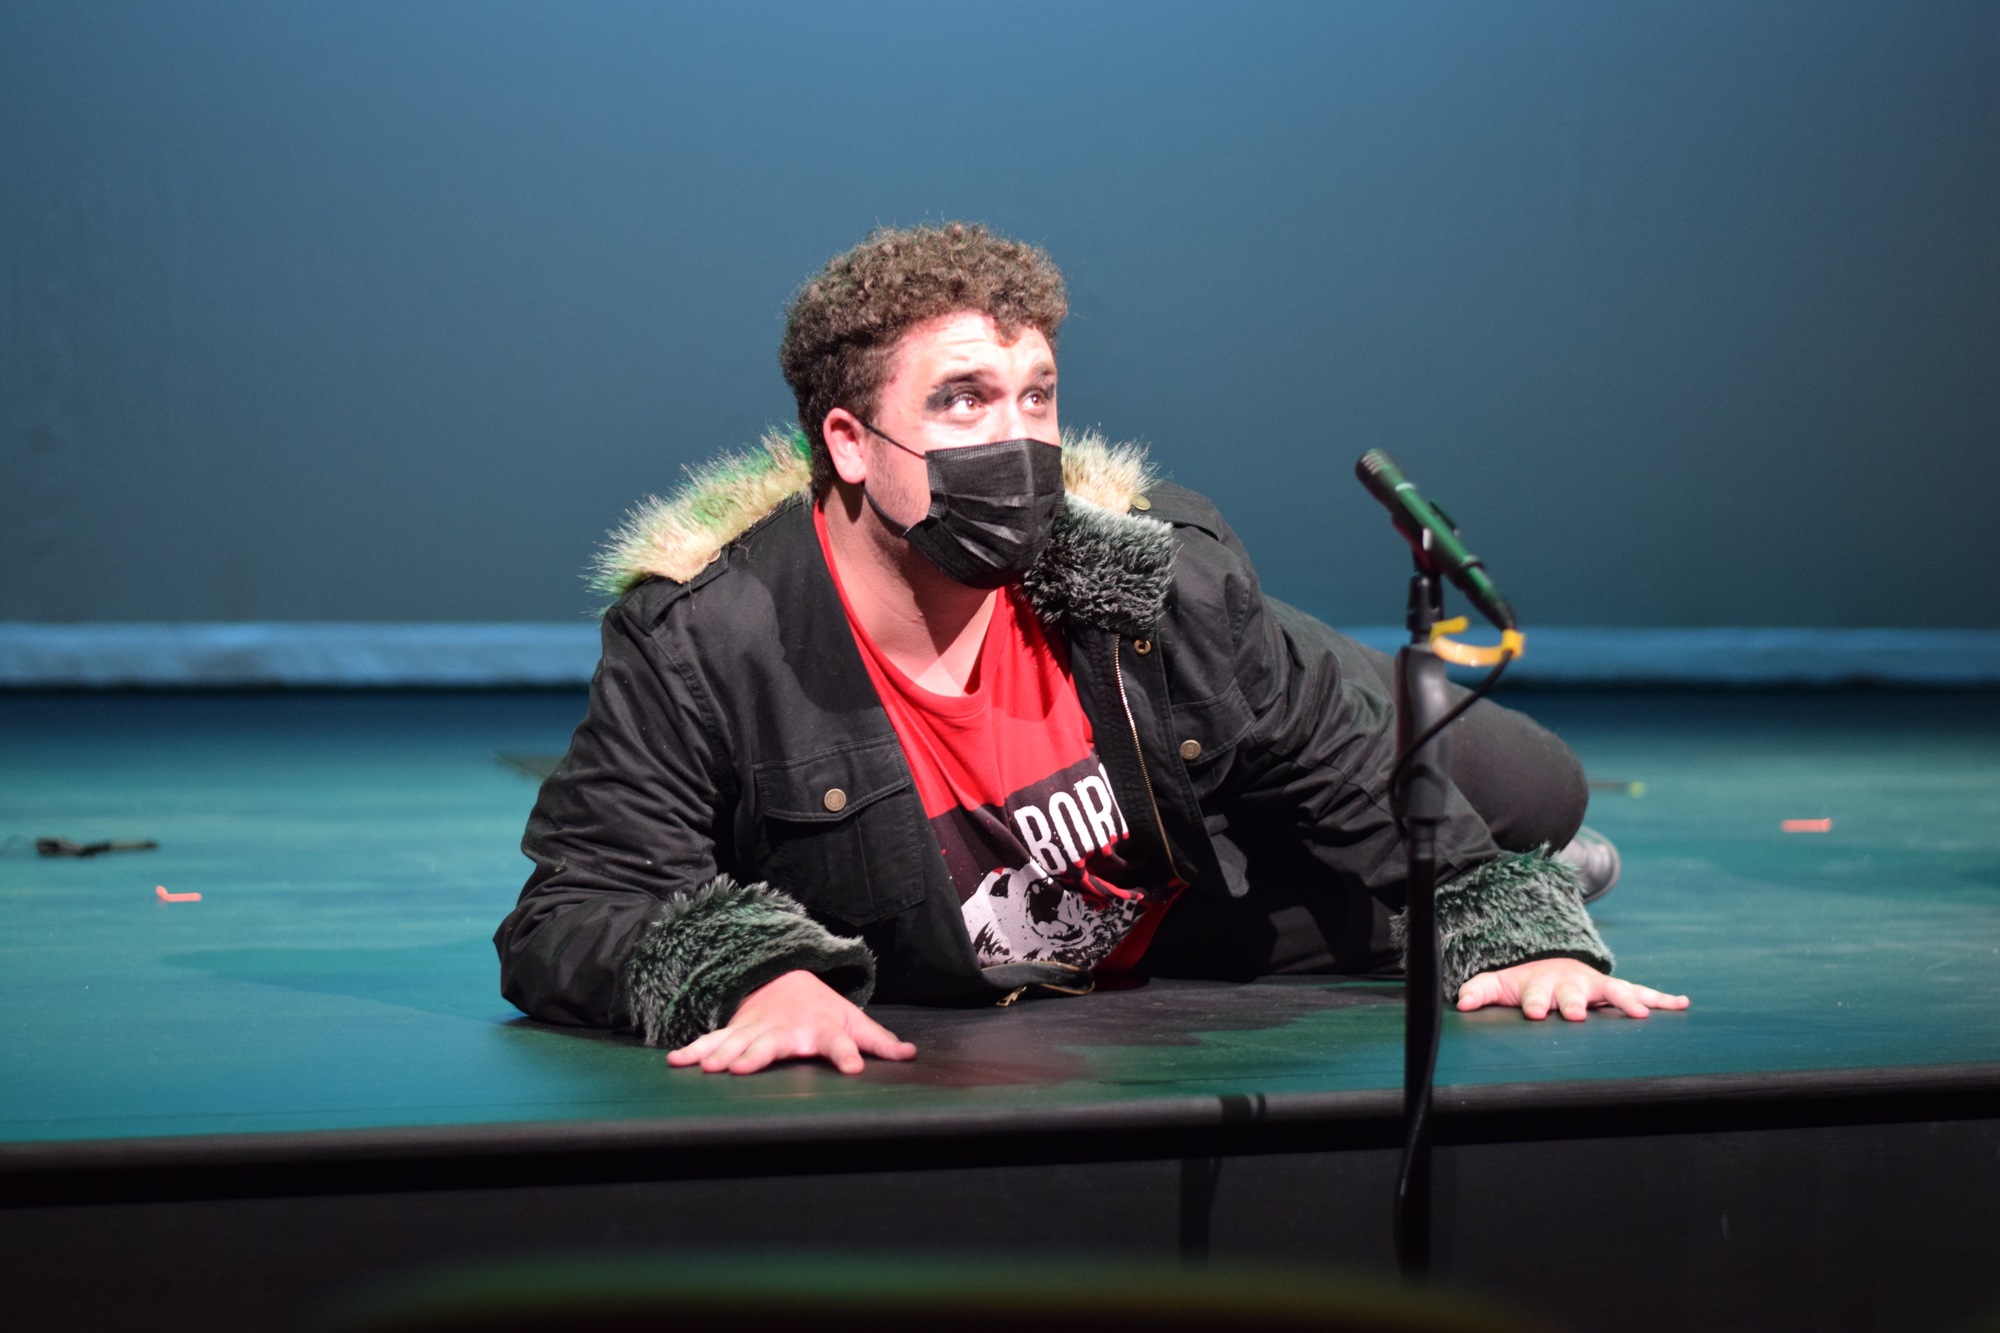 Senior Cole Jackson brings the character of The Wolf to life.